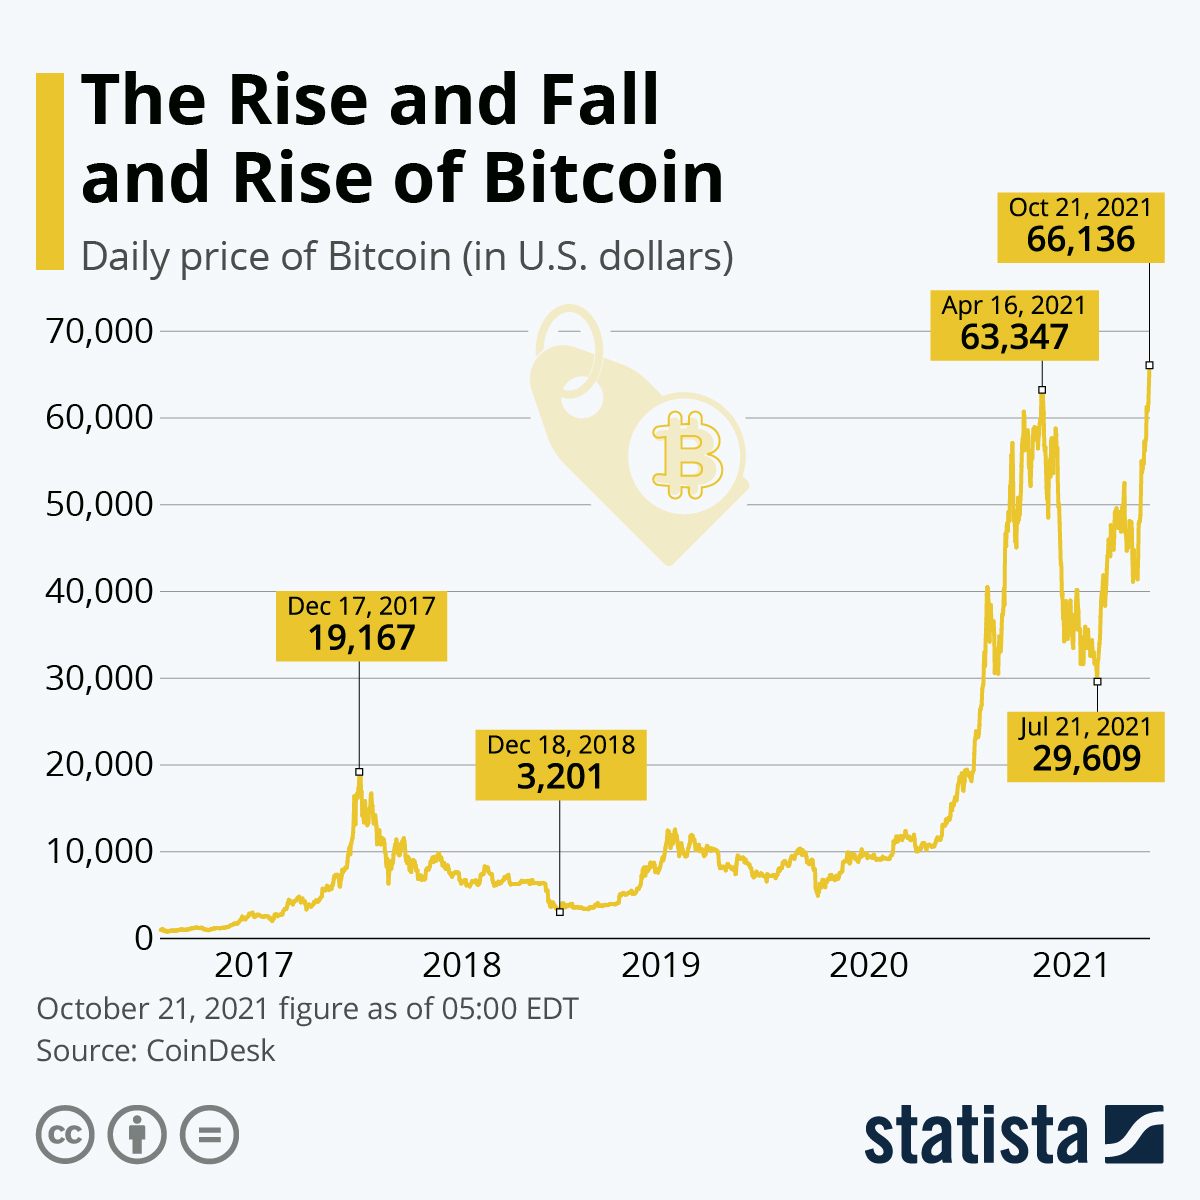 The rise and fall and rise of Bitcoin